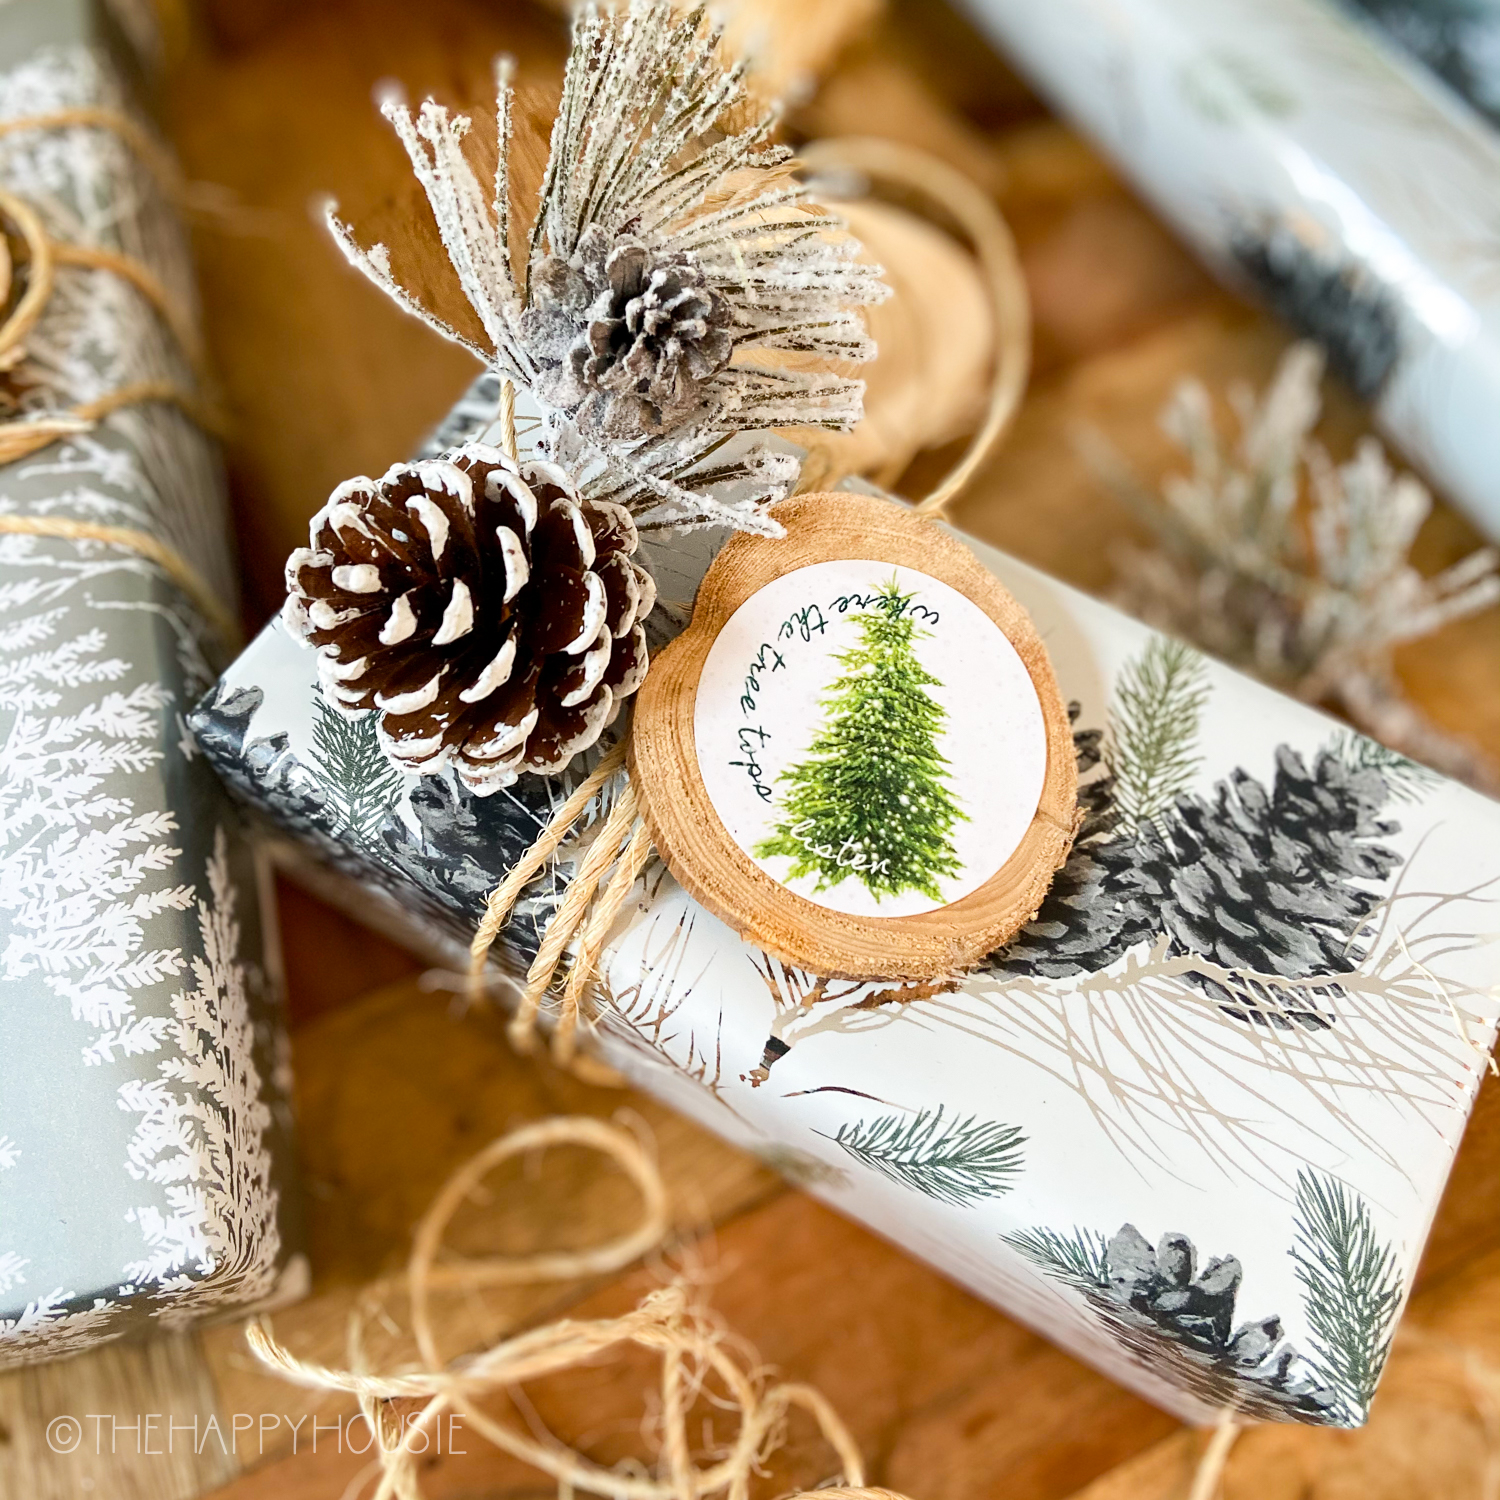 Unique Christmas Gift Wrapping on a Budget - Sanctuary Home Decor